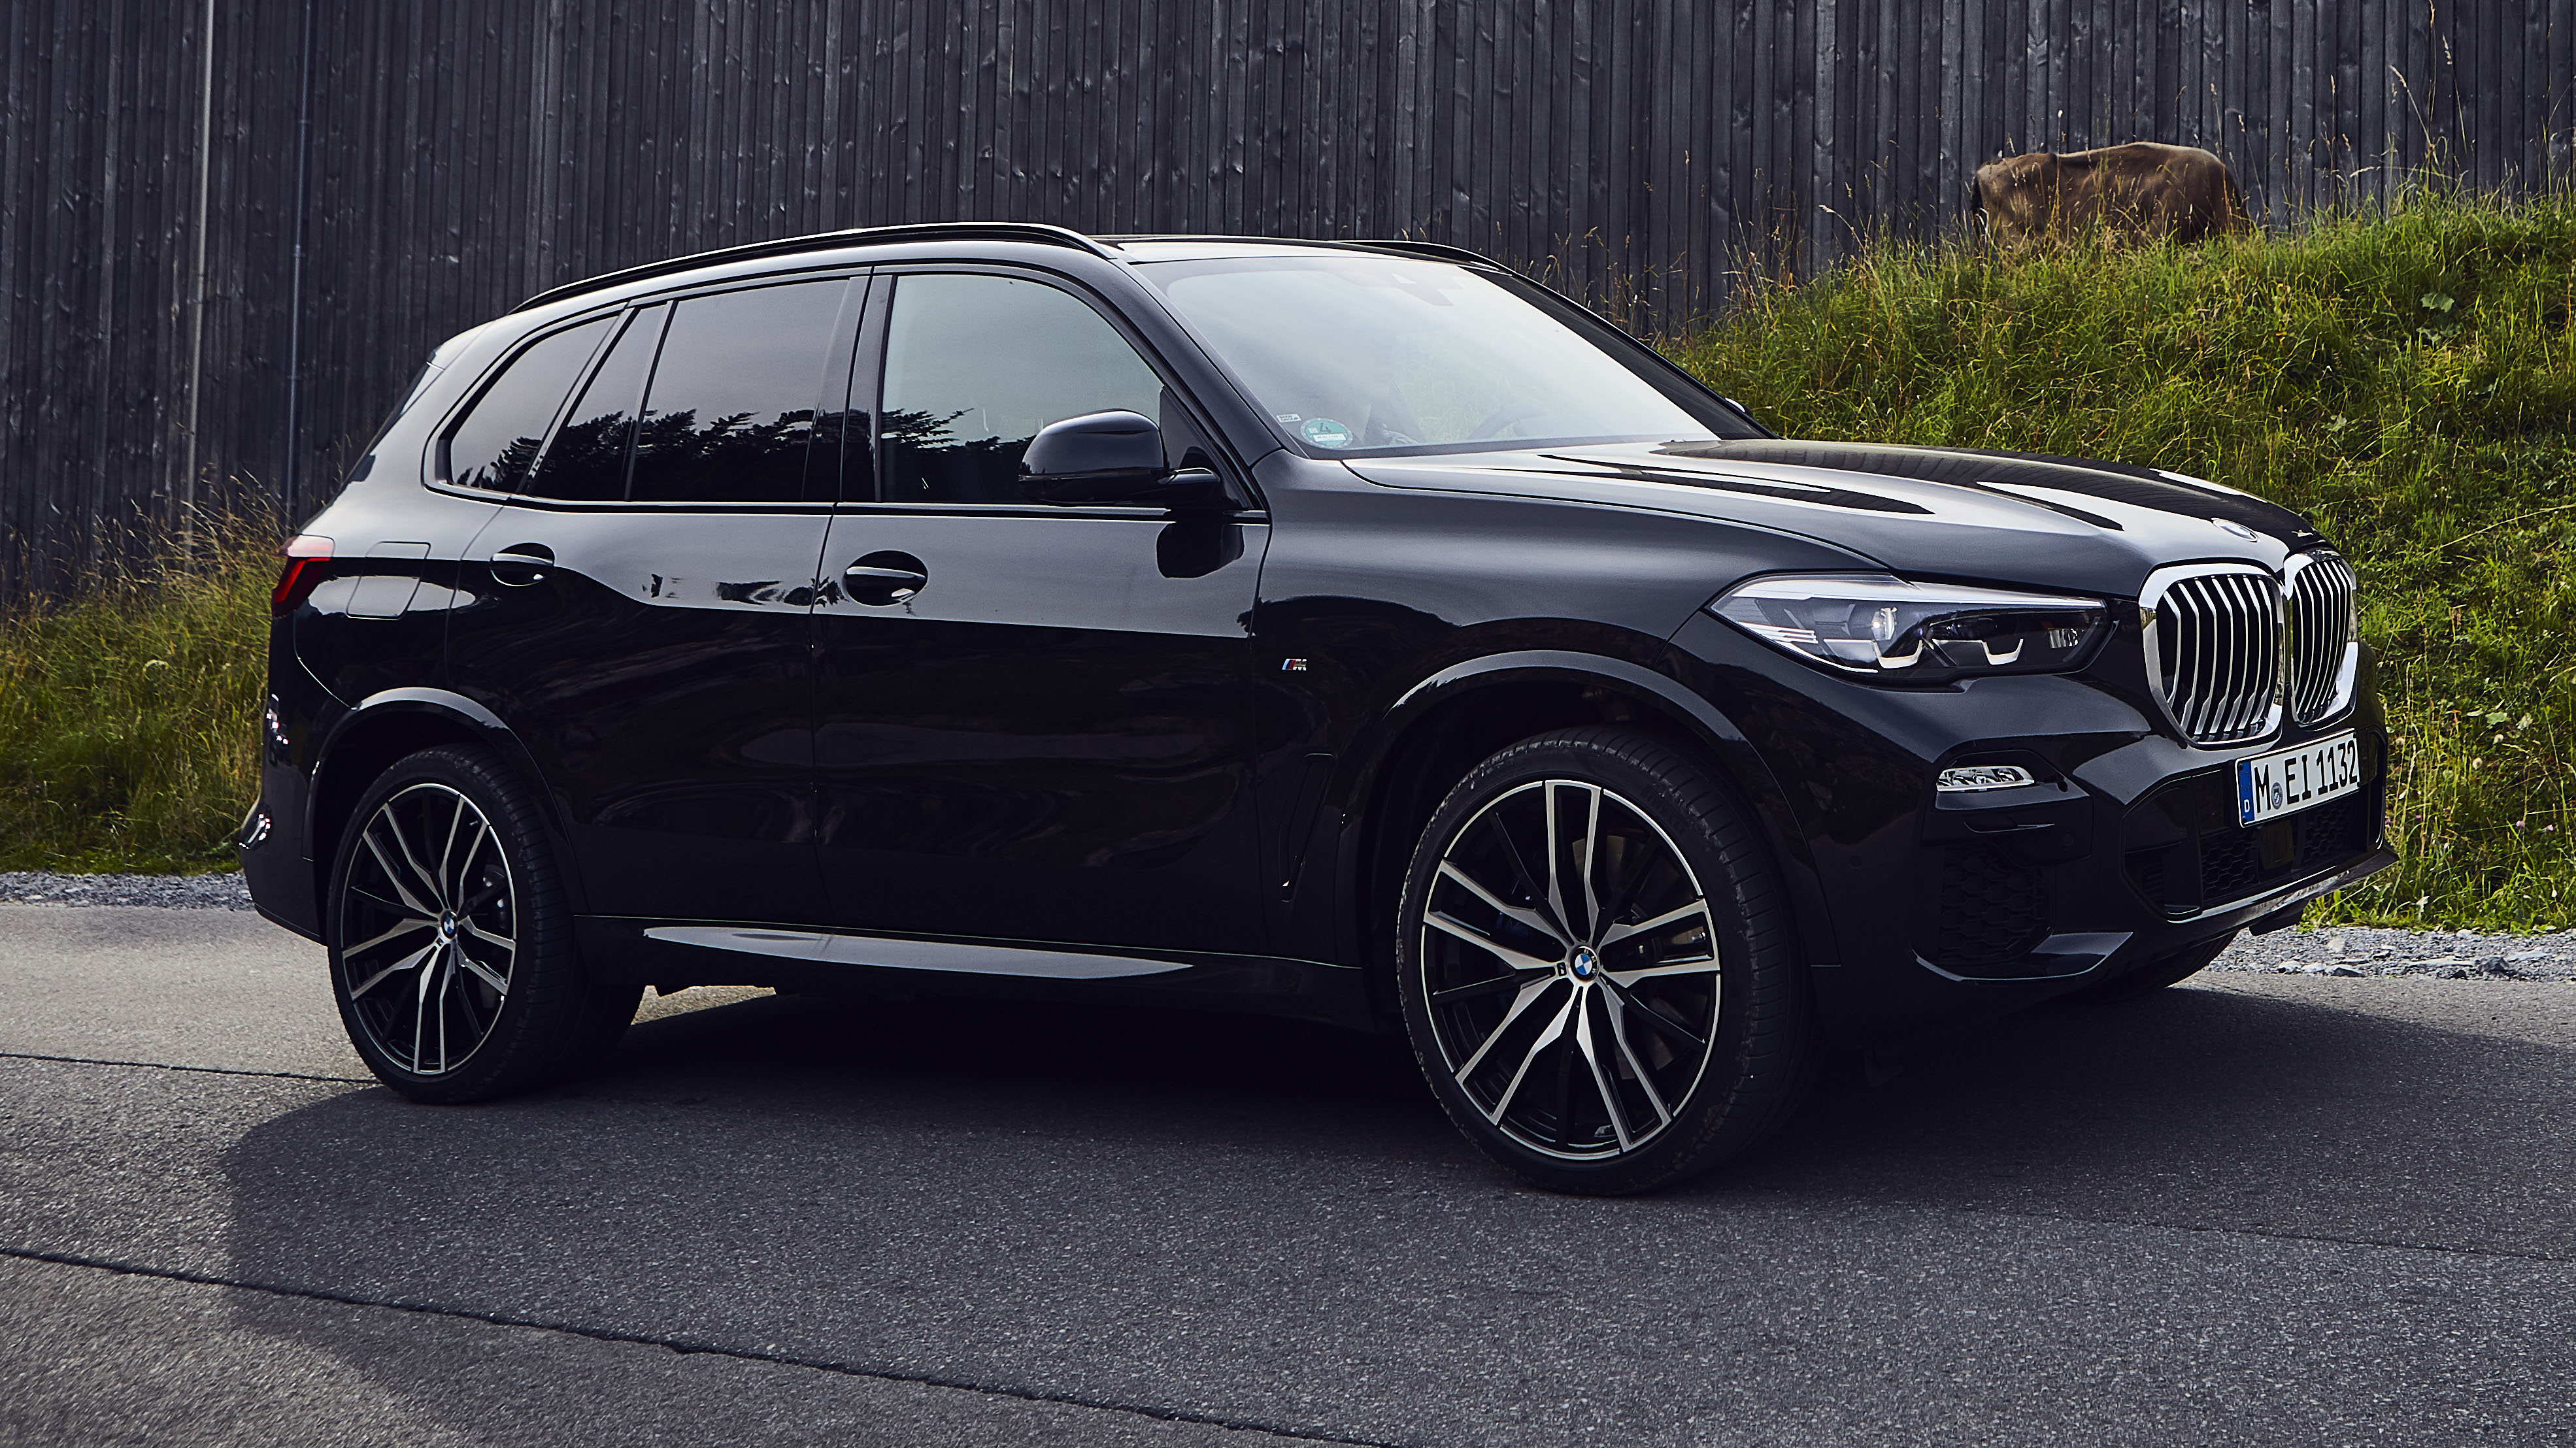 BMW X5 45e review: plug-in hybrid SUV tested Reviews 2023 | Top Gear